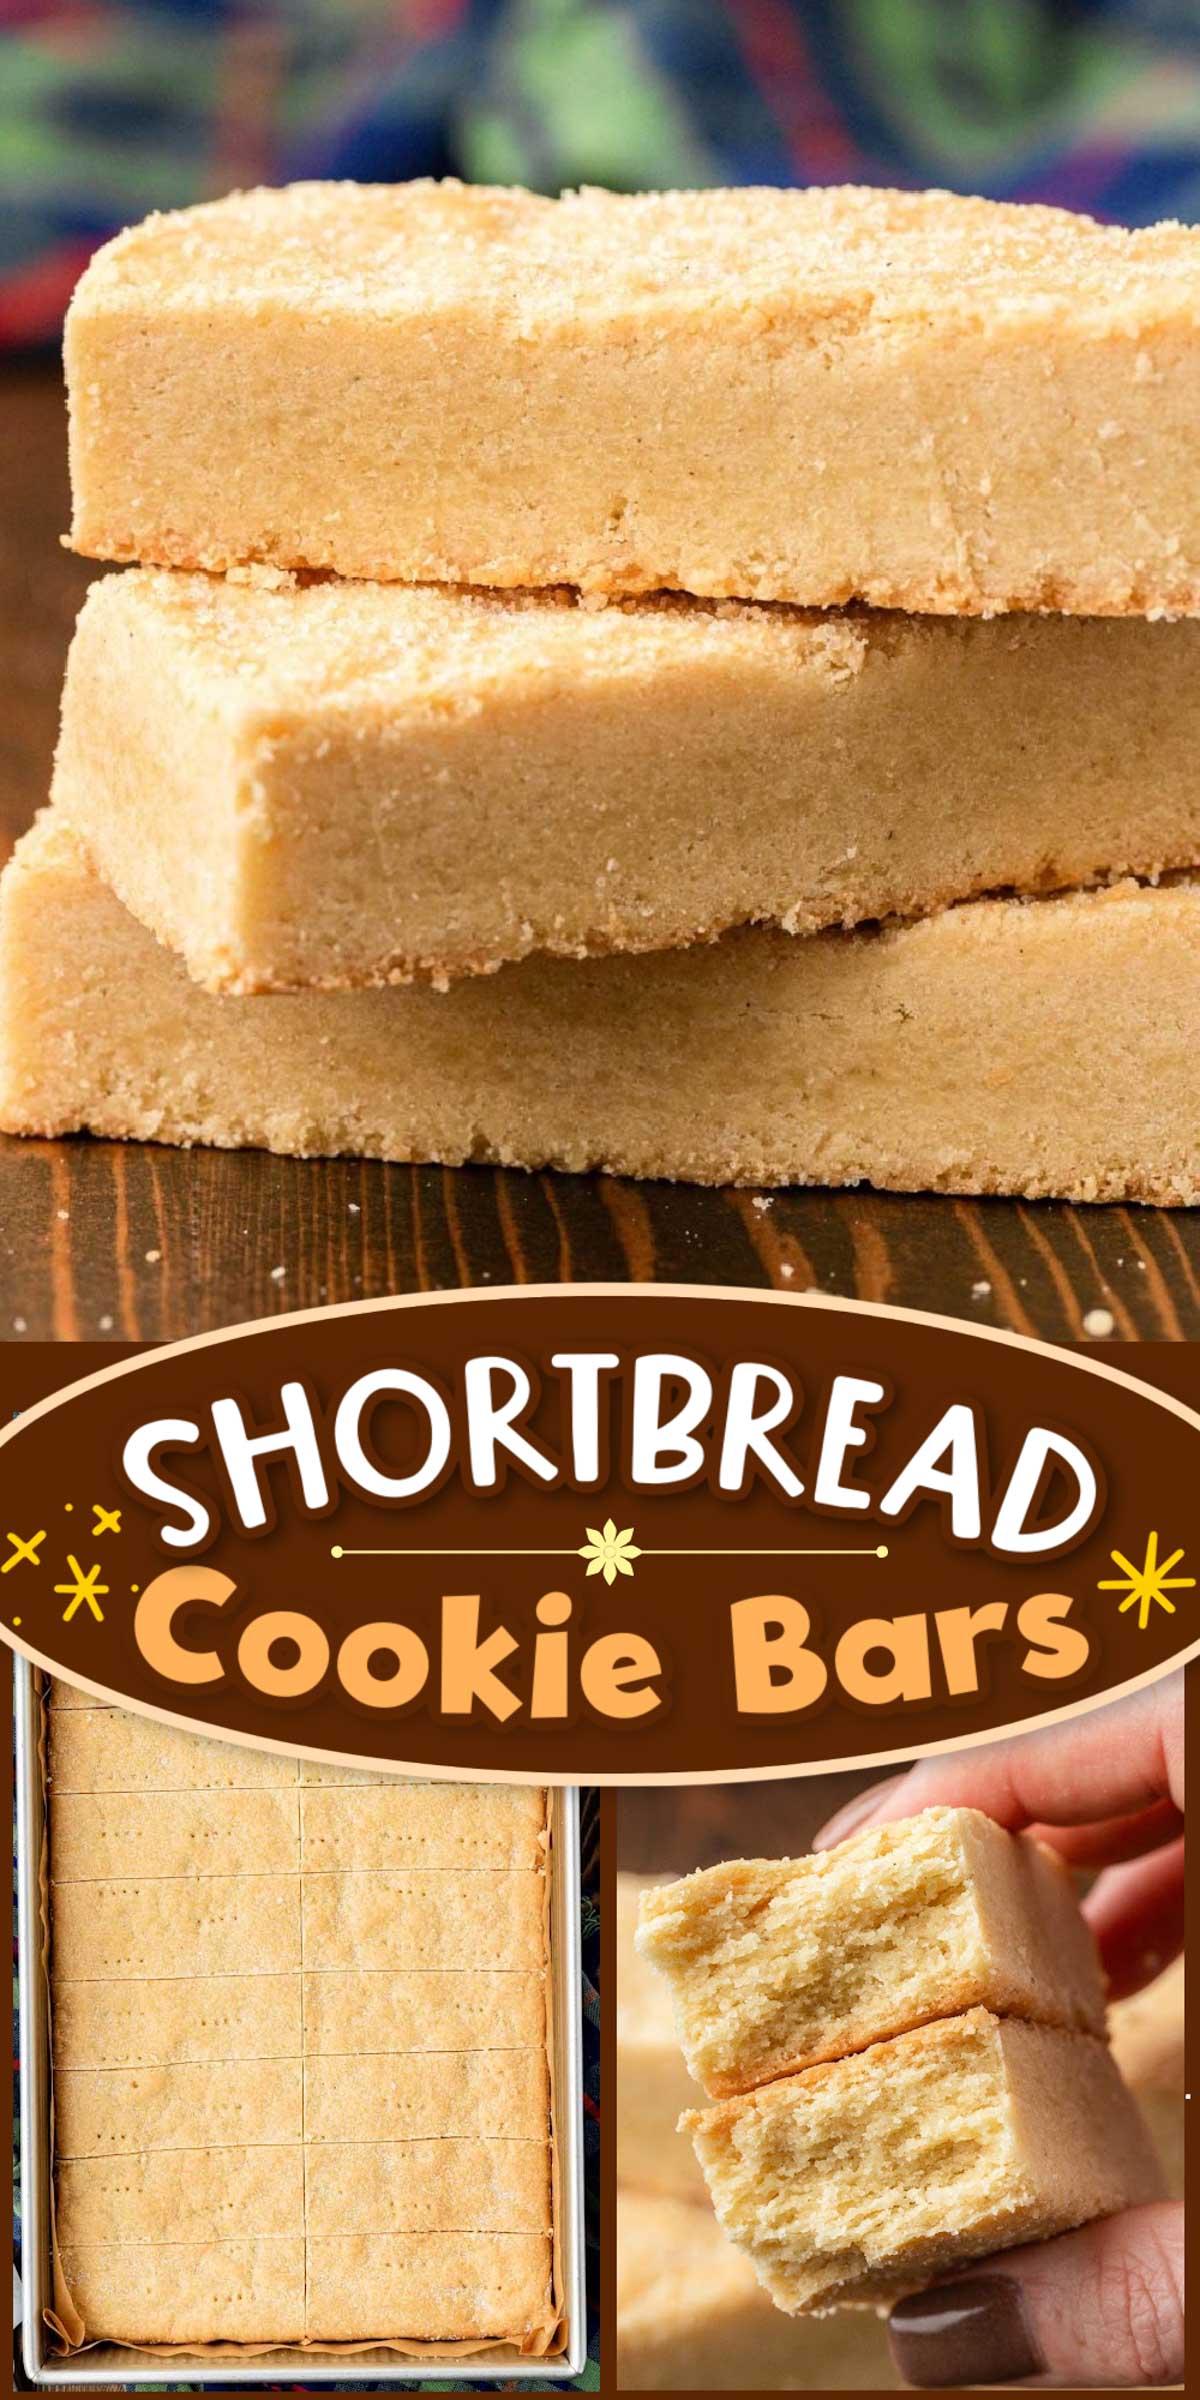 Look no further! This melt-in-your-mouth Shortbread is the Ted Lasso Biscuits Recipe that you've been waiting for! It's buttery, sweet, and so deliciously flakey - oh, and SUPER easy too! The first bite will have you exclaiming, "F*** Me." via @sugarandsoulco